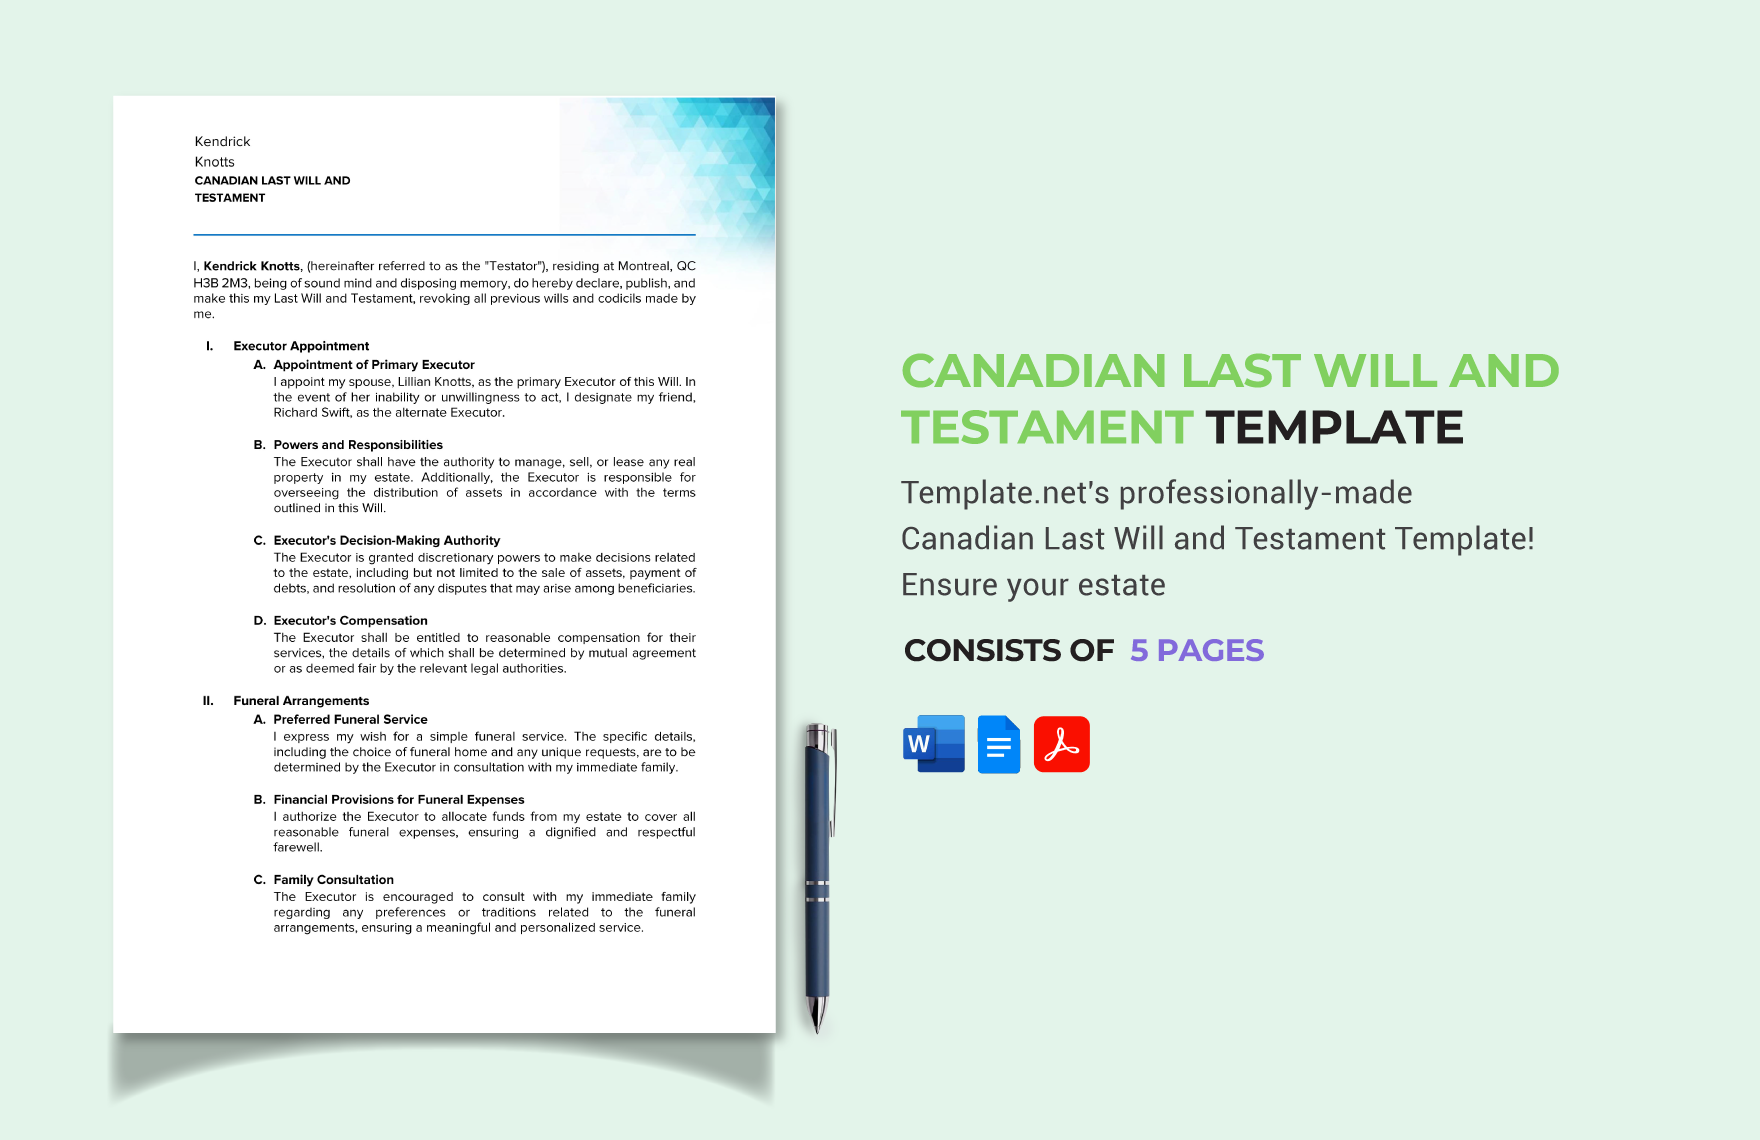 Canadian Last Will and Testament Template